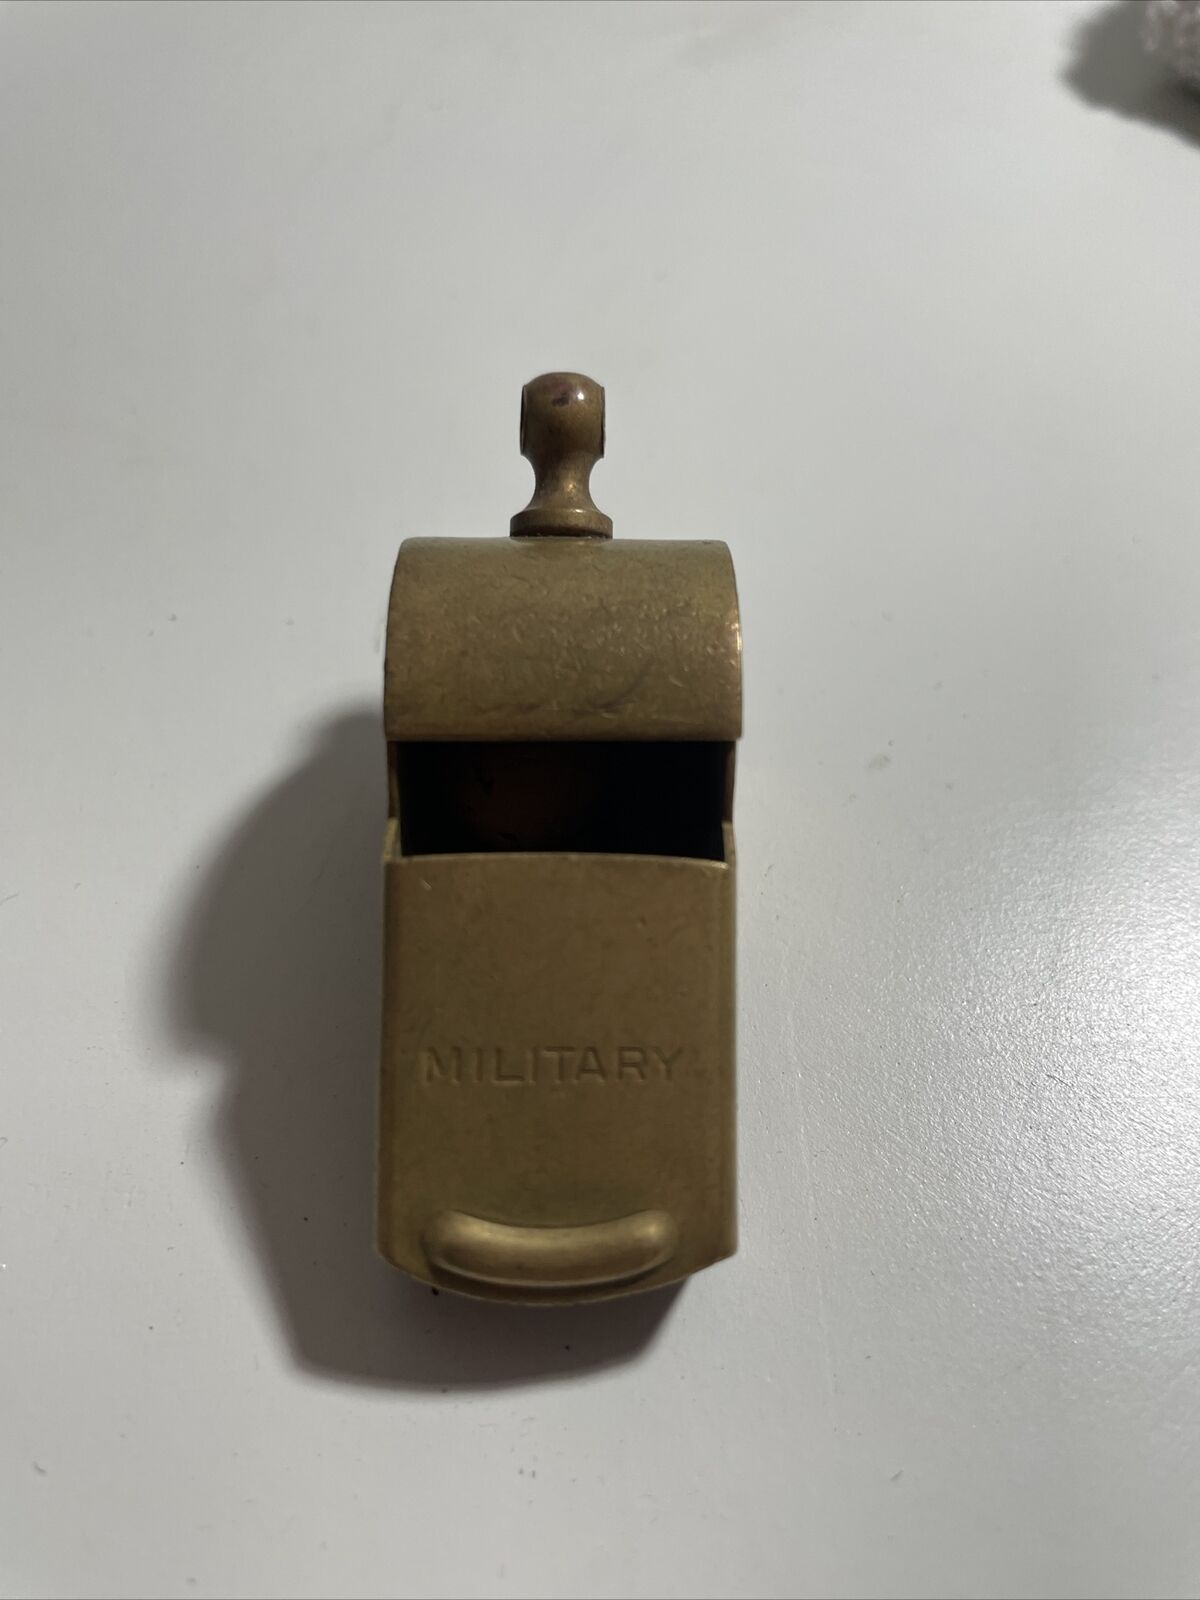 Vintage Official Military Whistle Antique Brass Cork Ball Made In USA